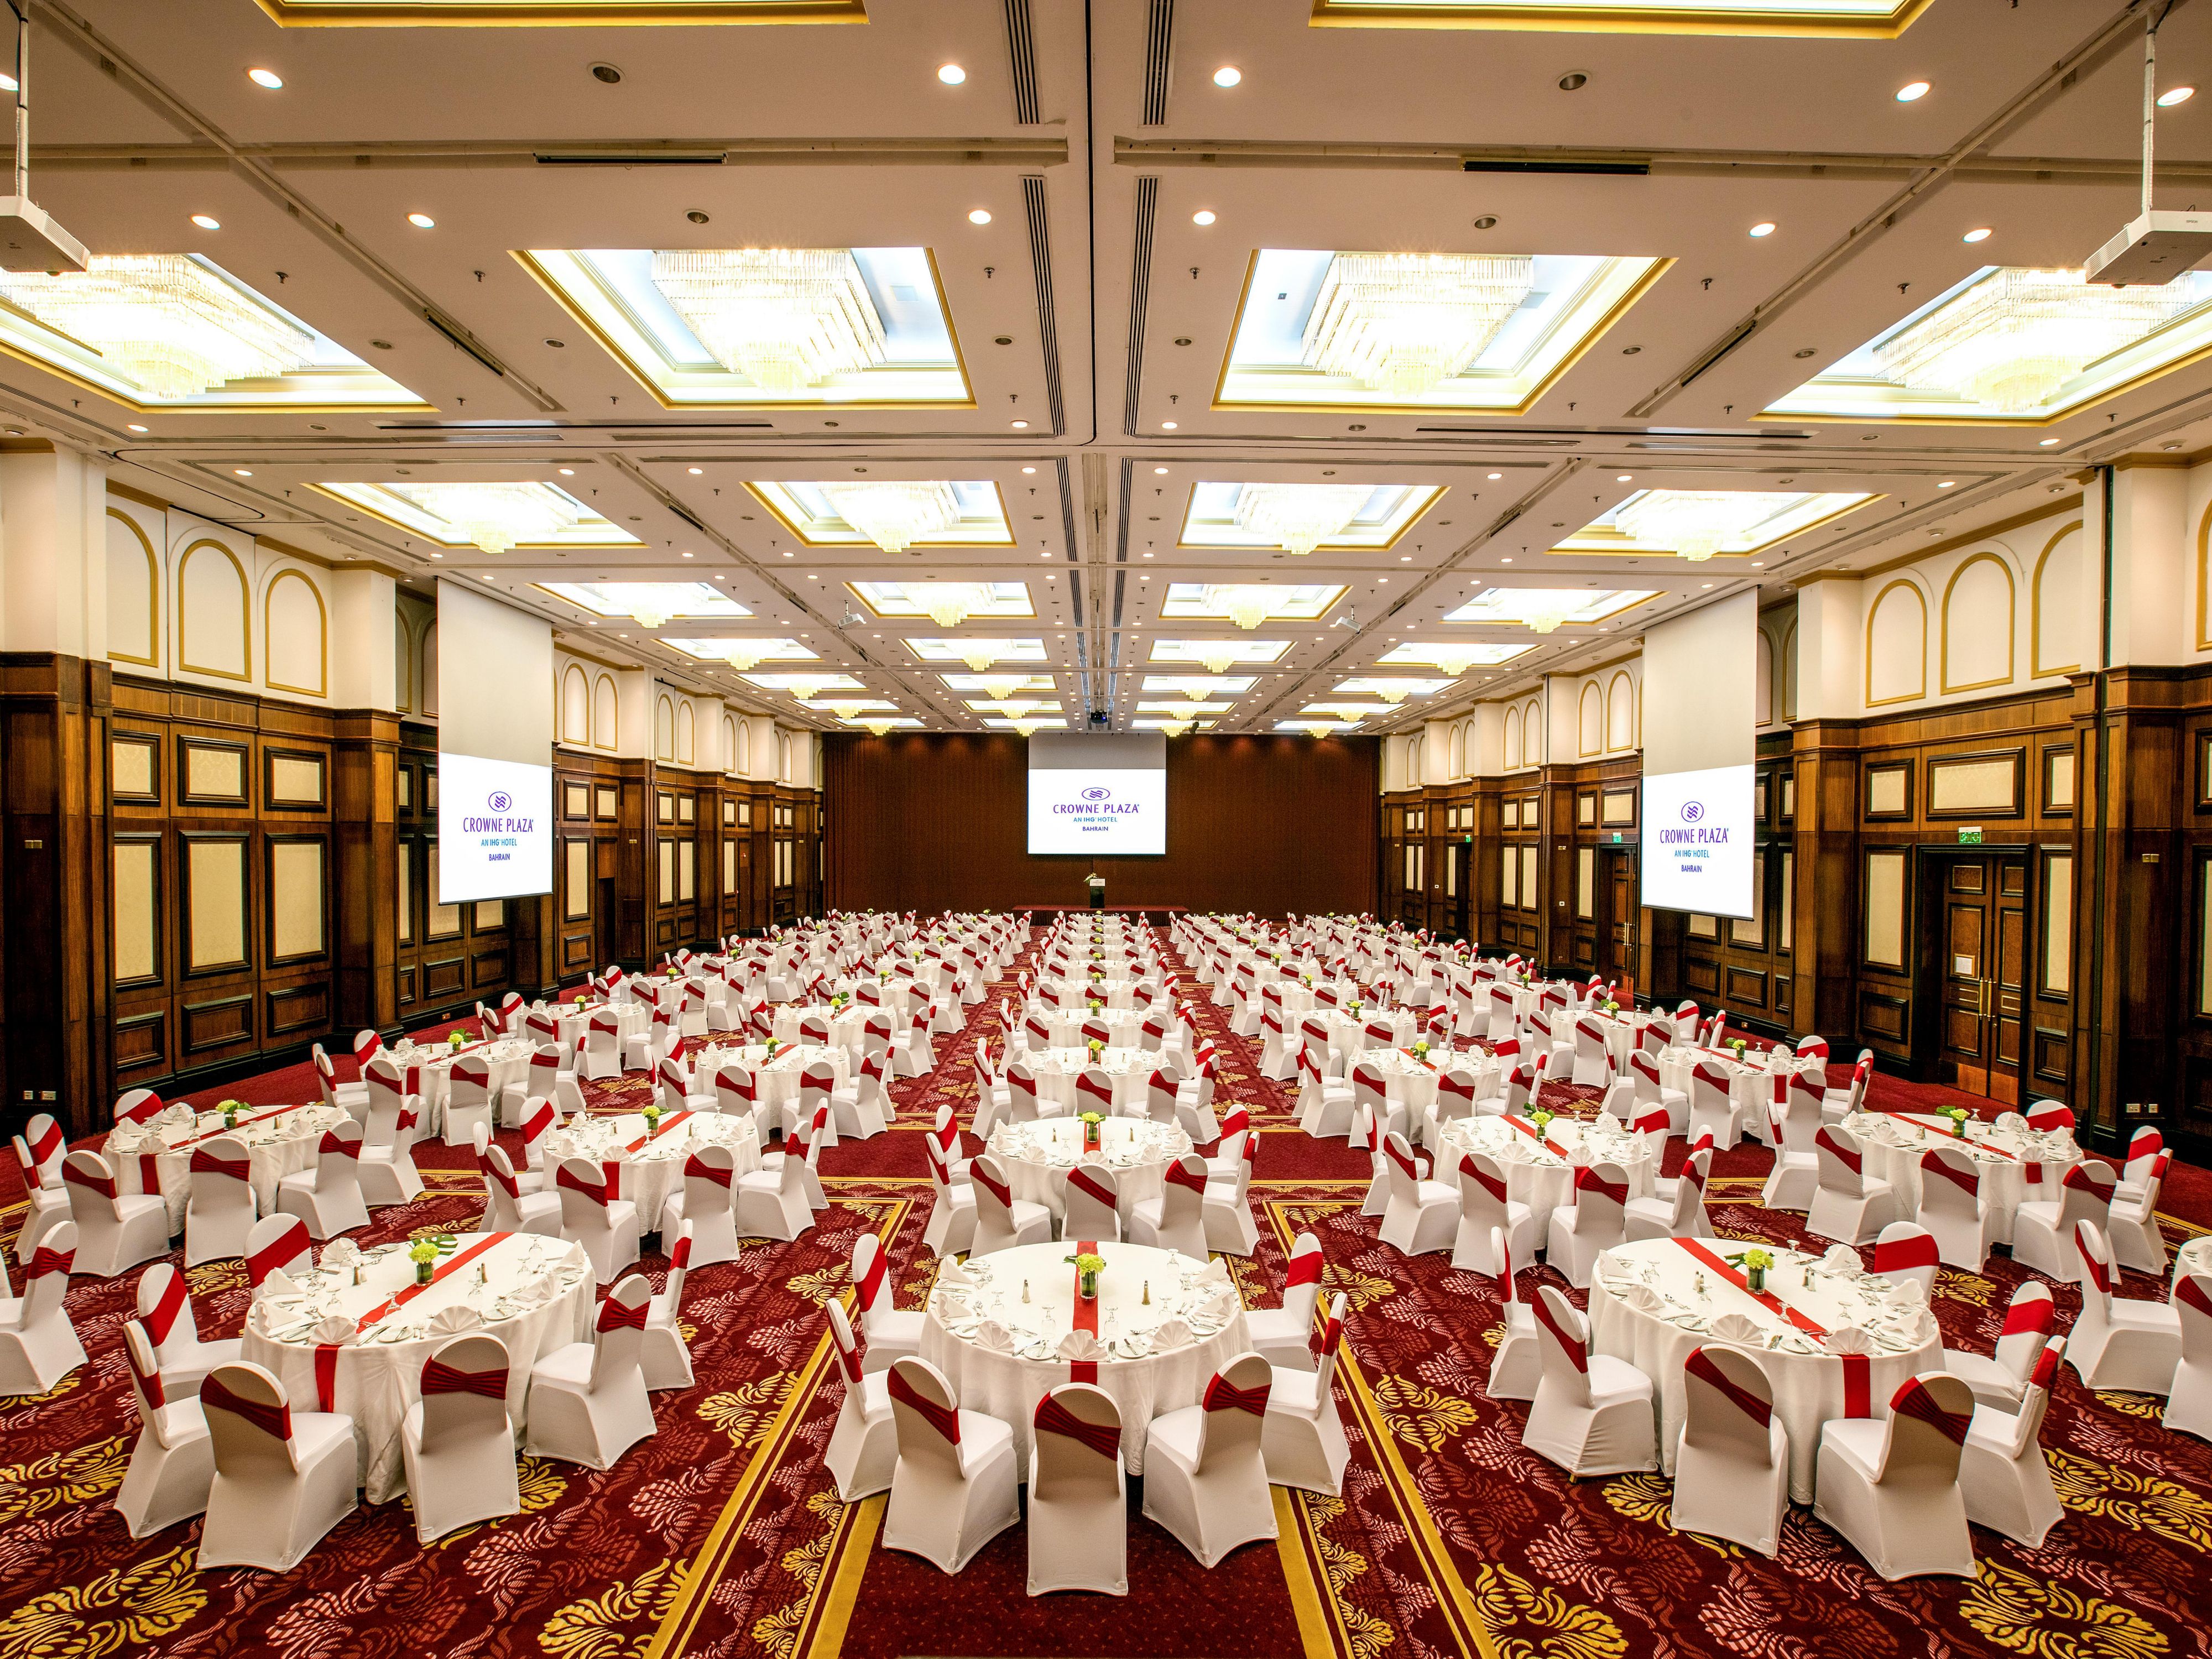 Bahrain Conference Centre is a leading venue for conferences and exhibitions, catering to more than 2000 delegates. Supporting the 1,200 square meters of primary conference and banqueting area, is a further 8 individually appointed meeting rooms, a VIP lounge and a large lobby and pre-function area.